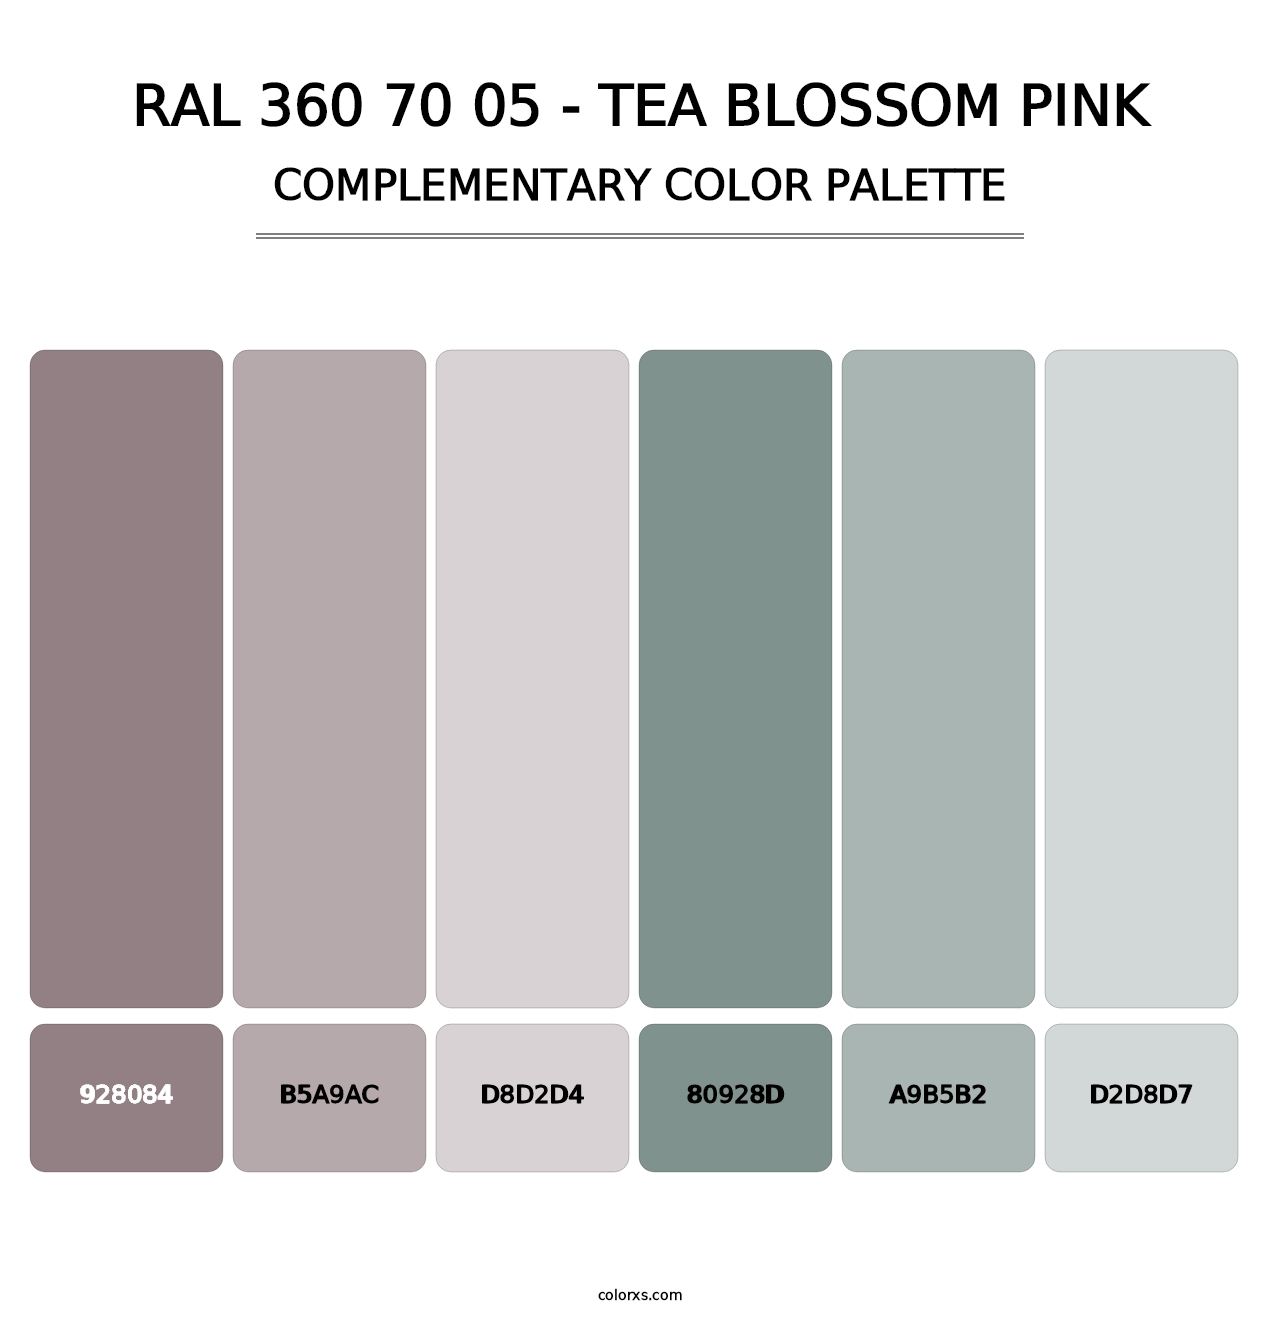 RAL 360 70 05 - Tea Blossom Pink - Complementary Color Palette